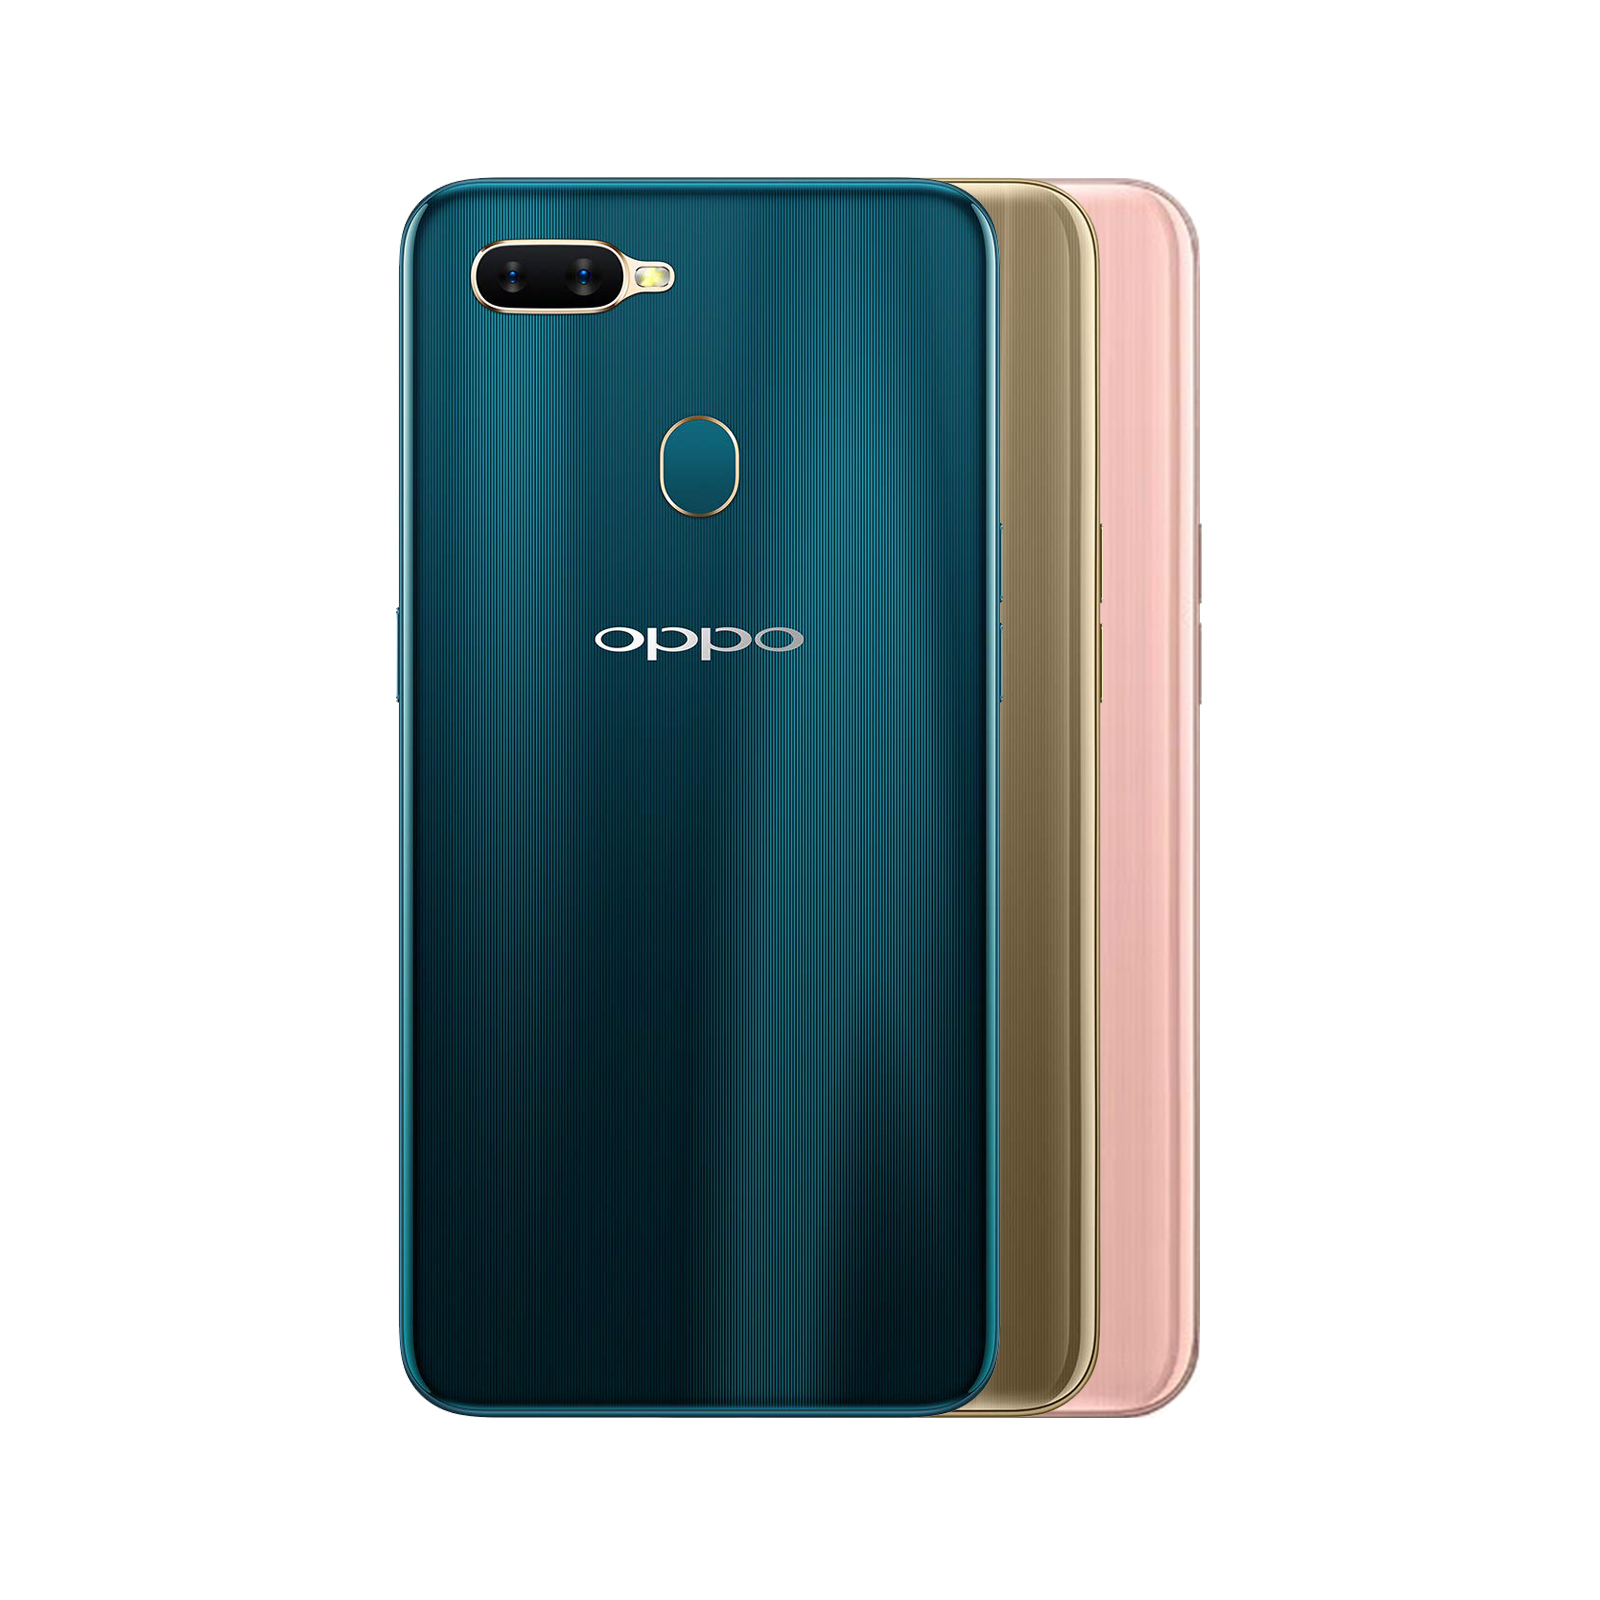 ANDROID - OPPO AX7☆ゴールドの+asaneed.com